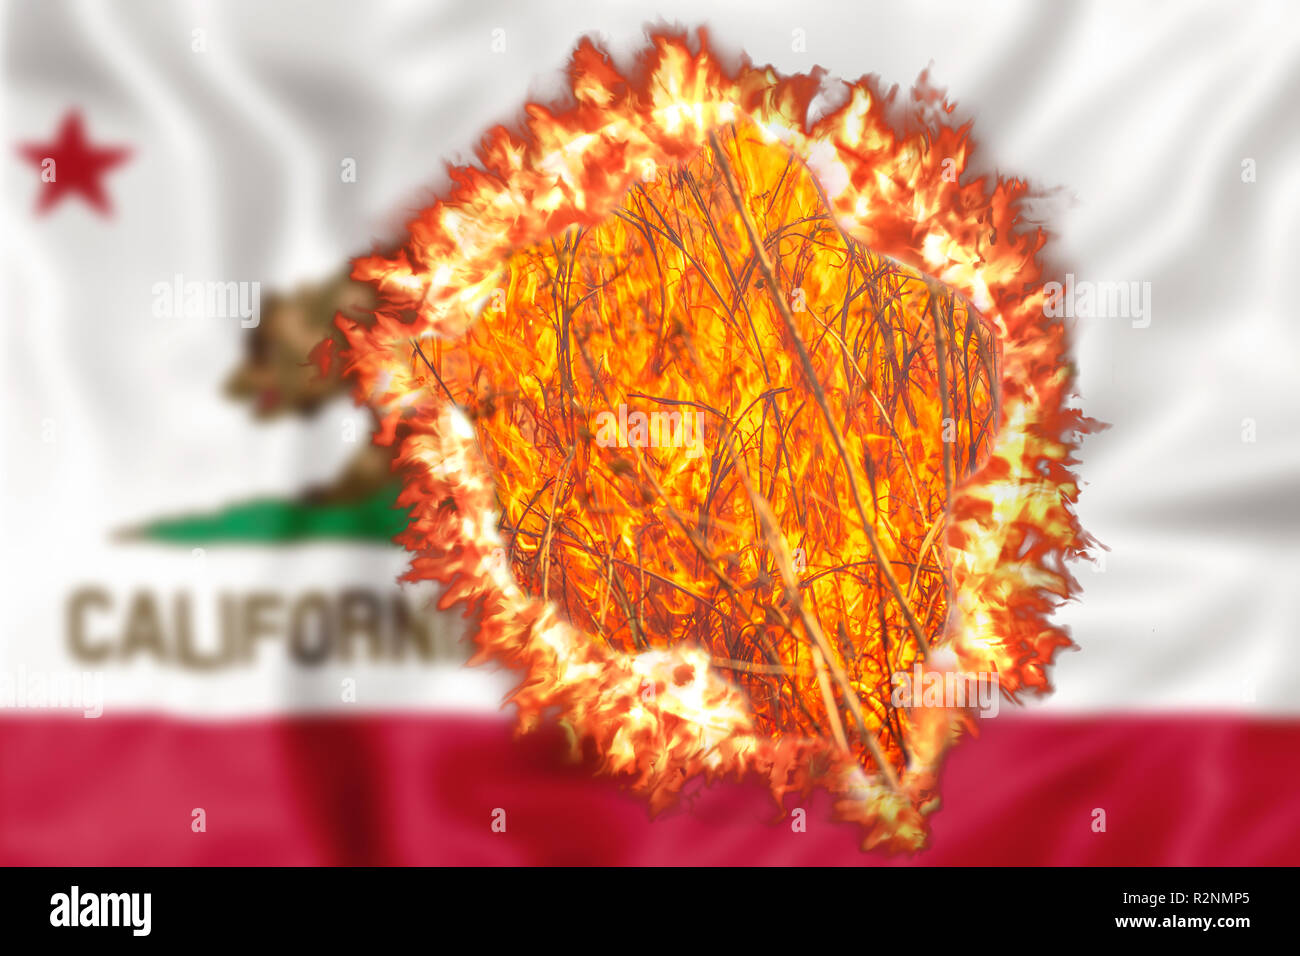 Blurred california Republic Flag with red fire background. concept of fire affecting California in 2018. The most devastating and deadly ever seen in the United States of America. Stock Photo